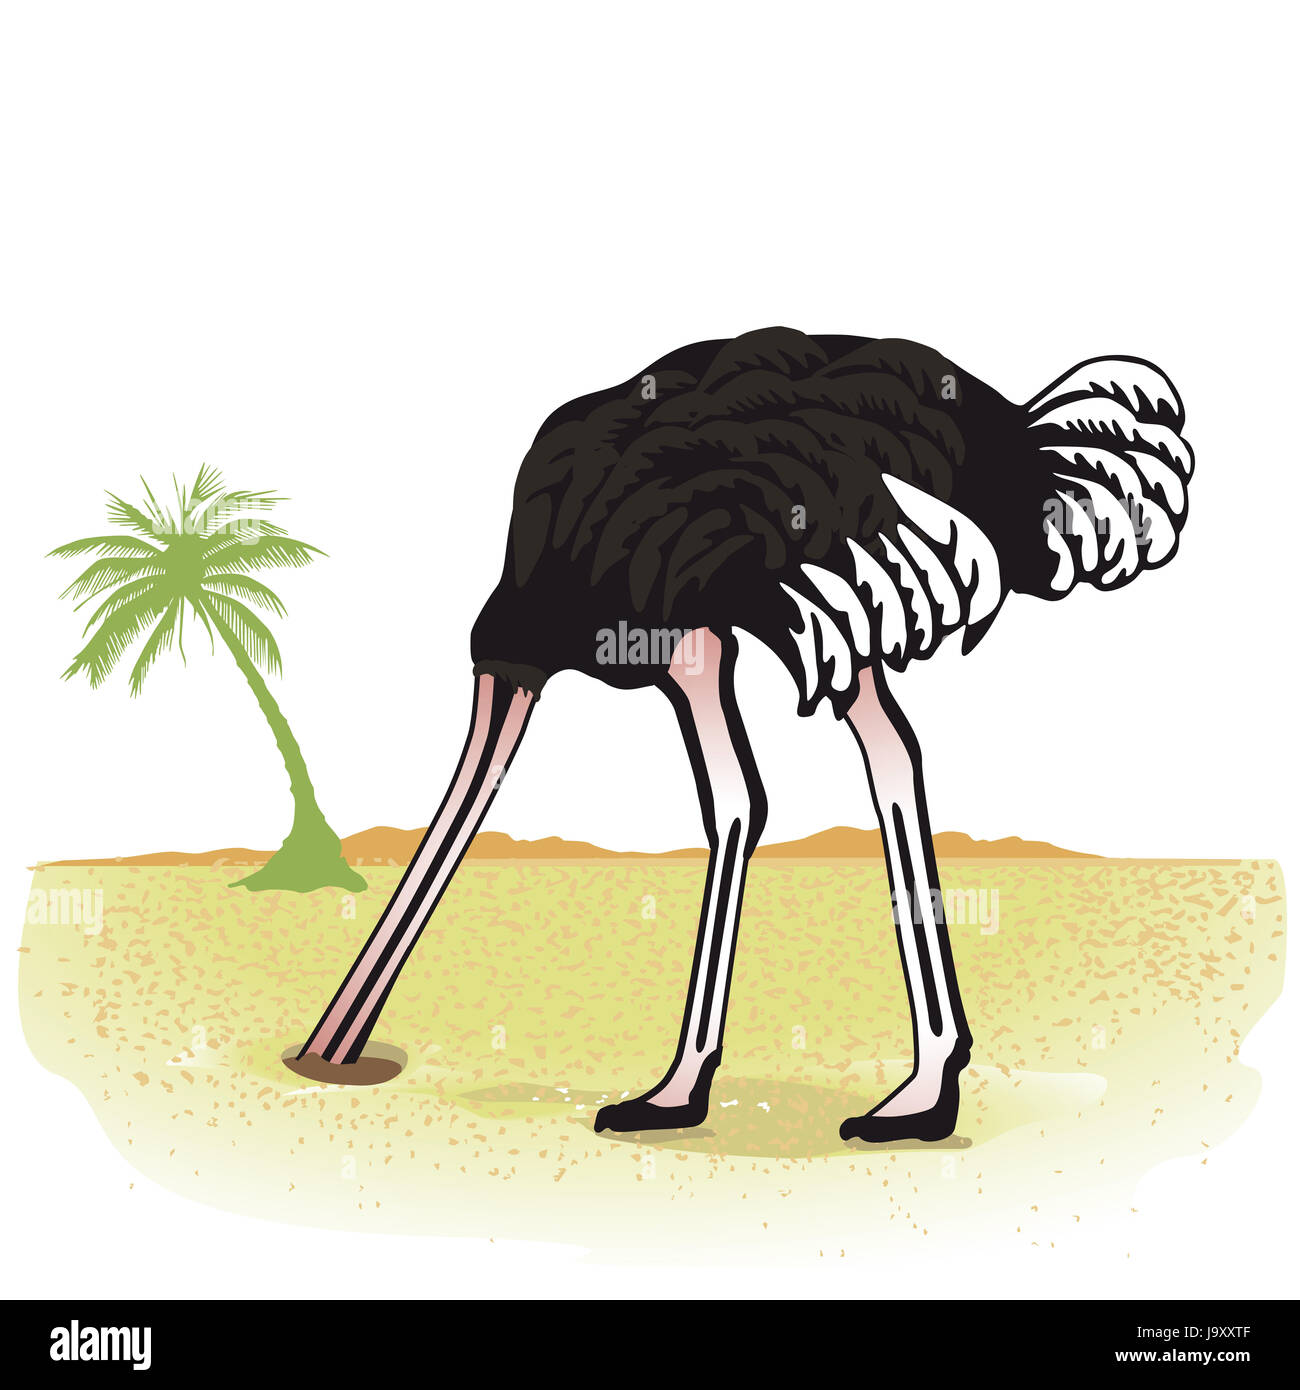 ostrich hides its head in the sand Stock Photo